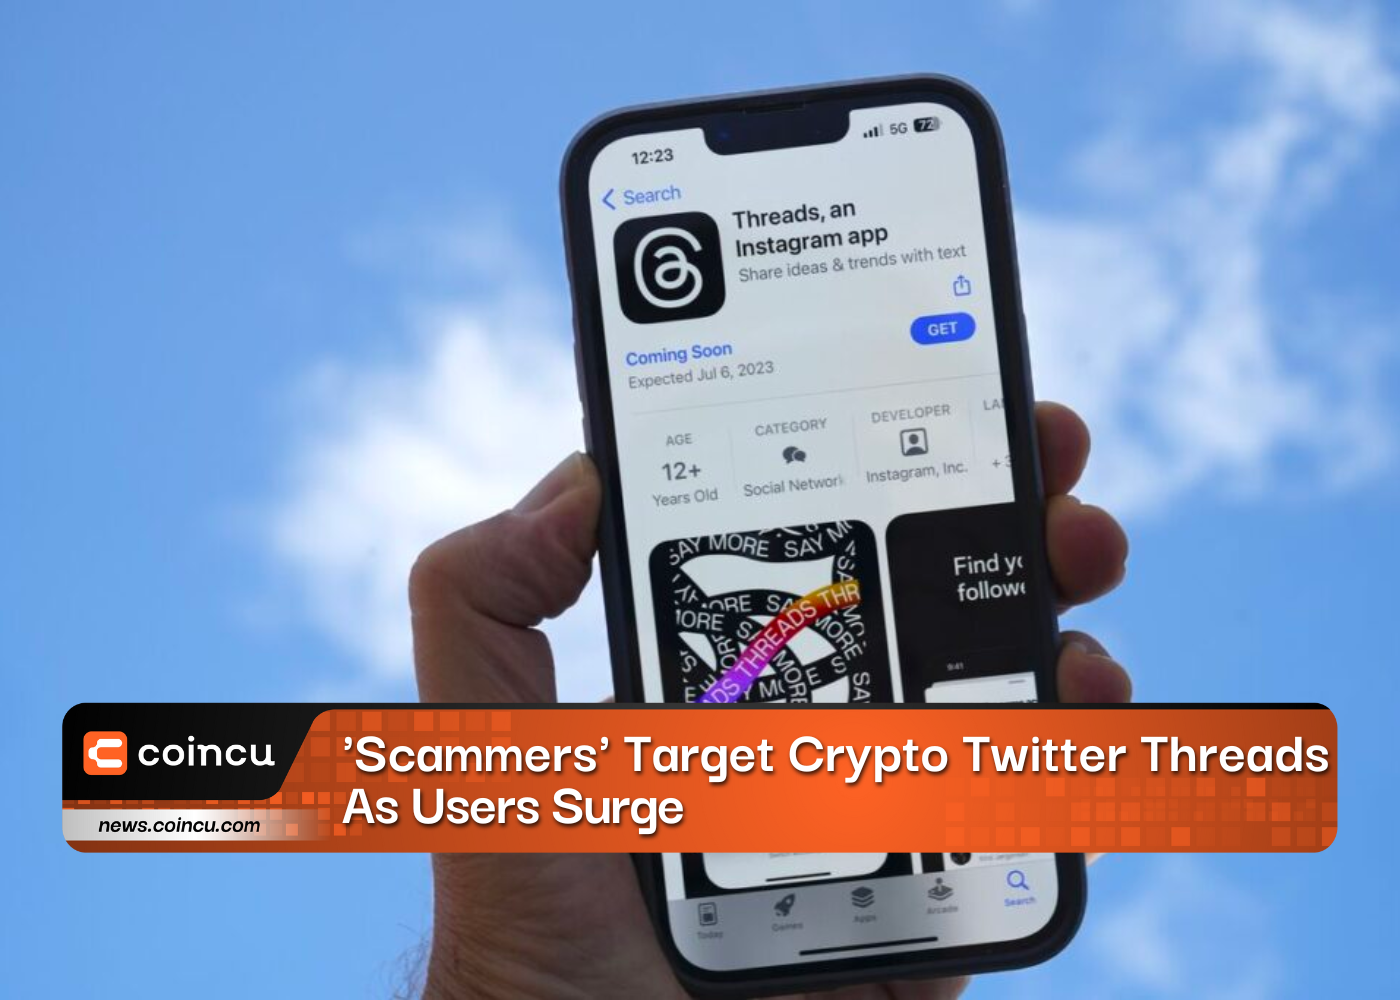 ‘Scammers’ Target Crypto Twitter Threads As Users Surge